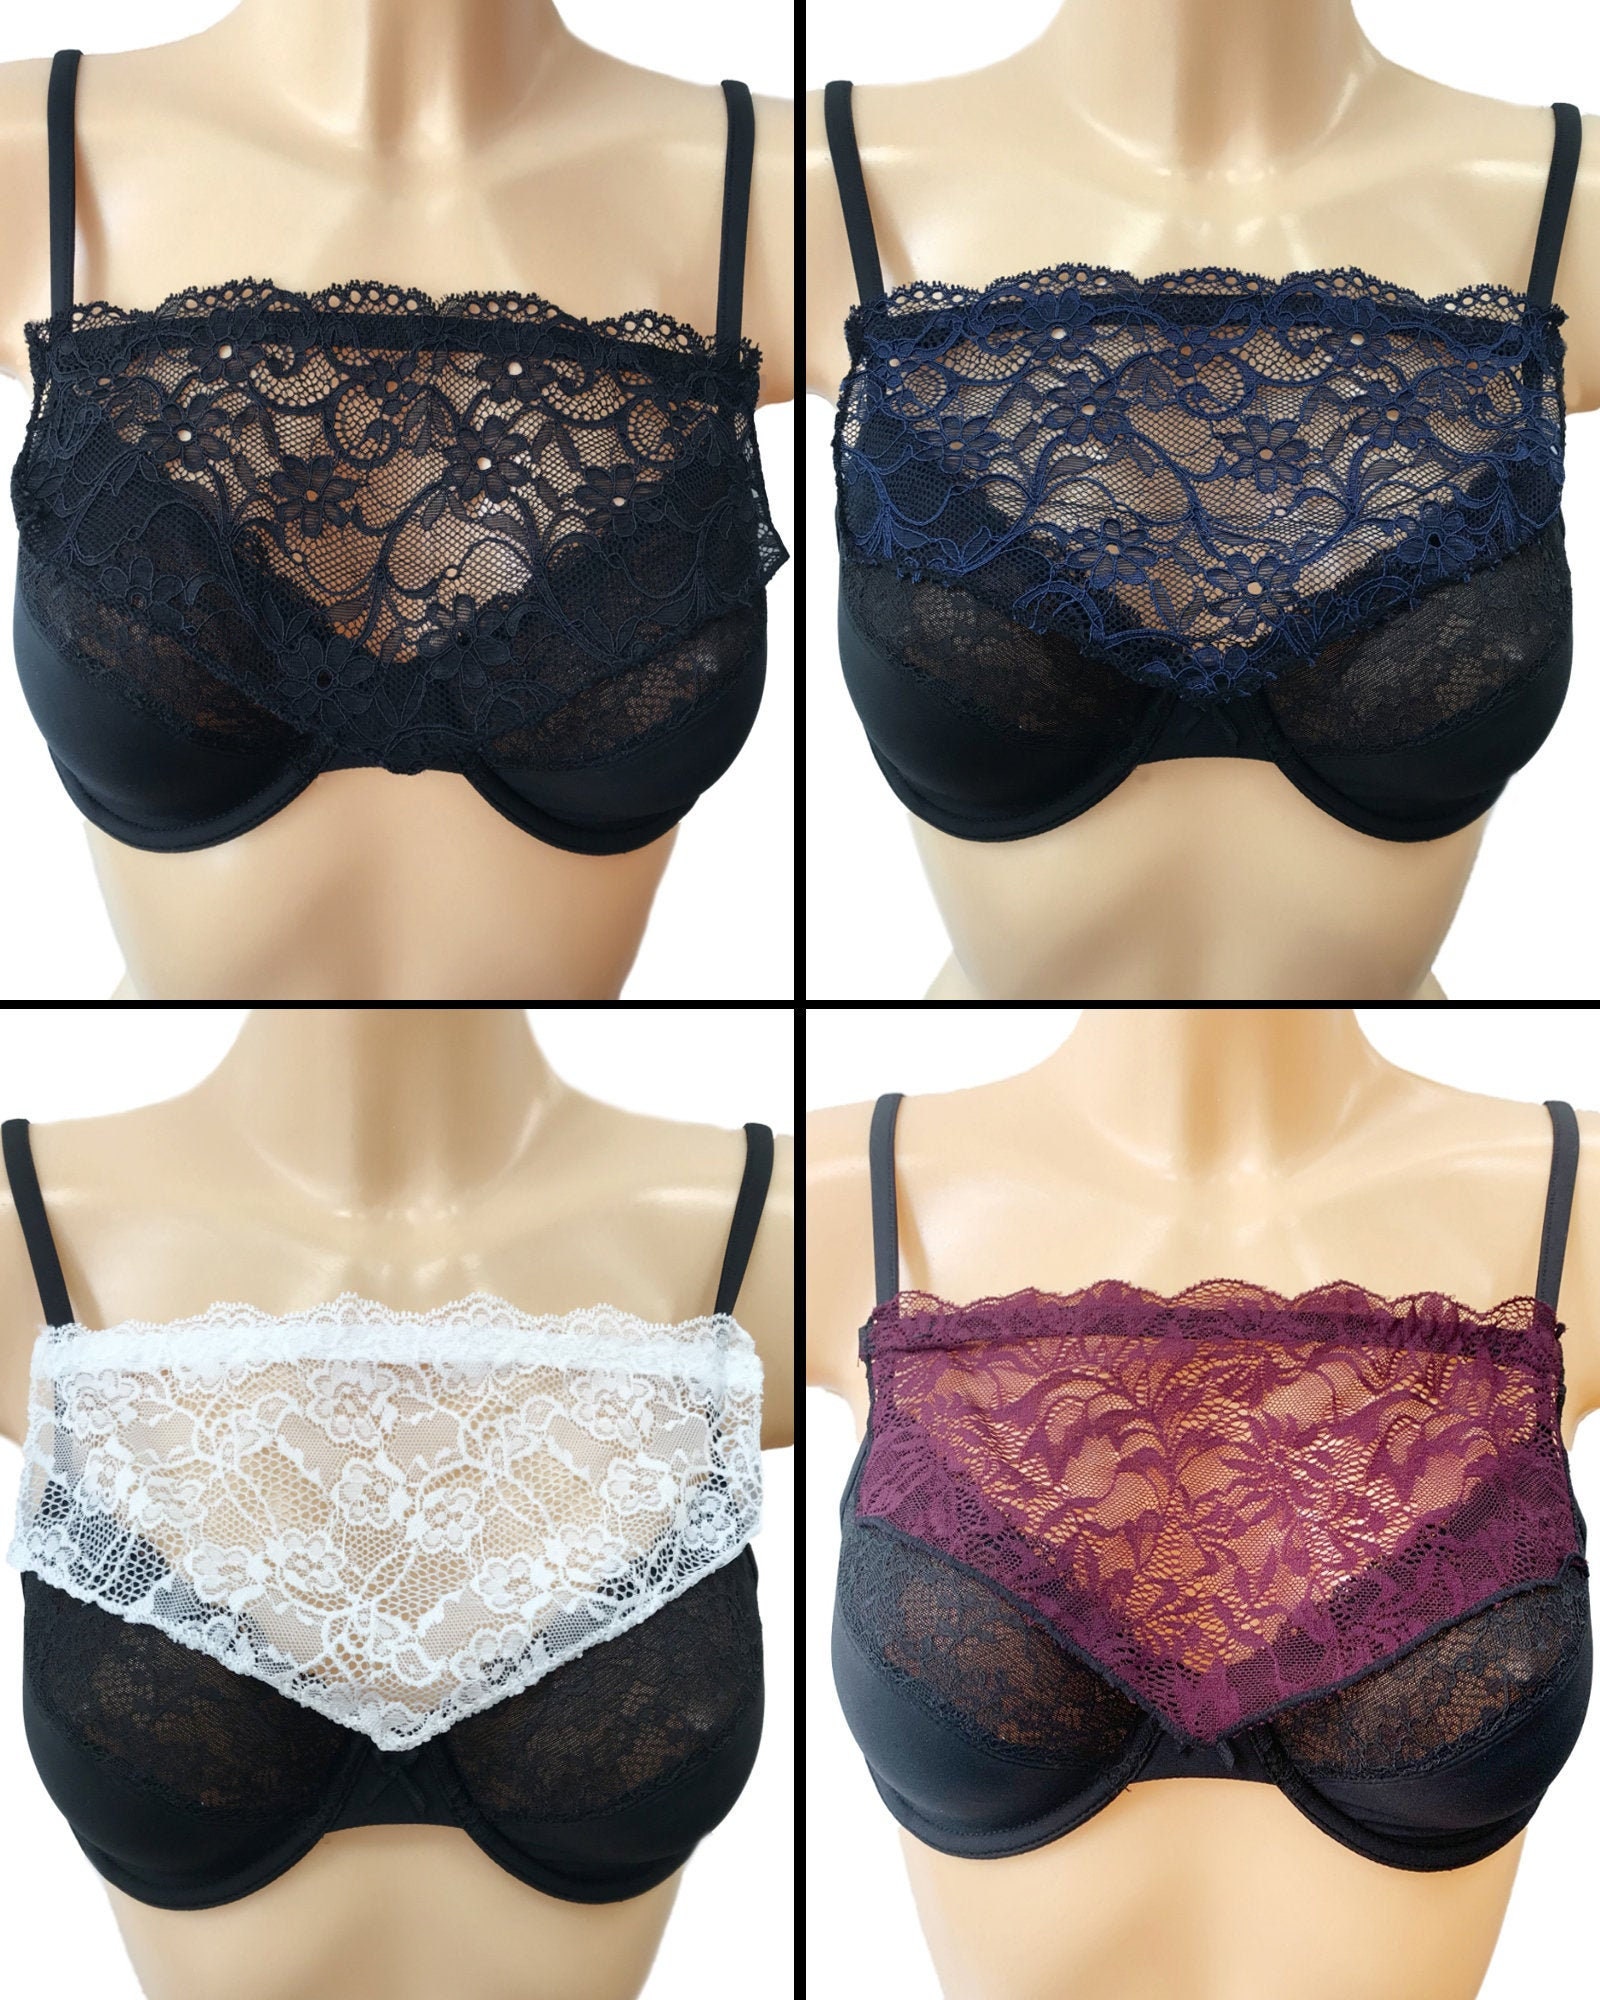 Modesty Panel Lace Bra Insert Instant Camisole Cleavage Cover Black Navy  White Purple -  UK